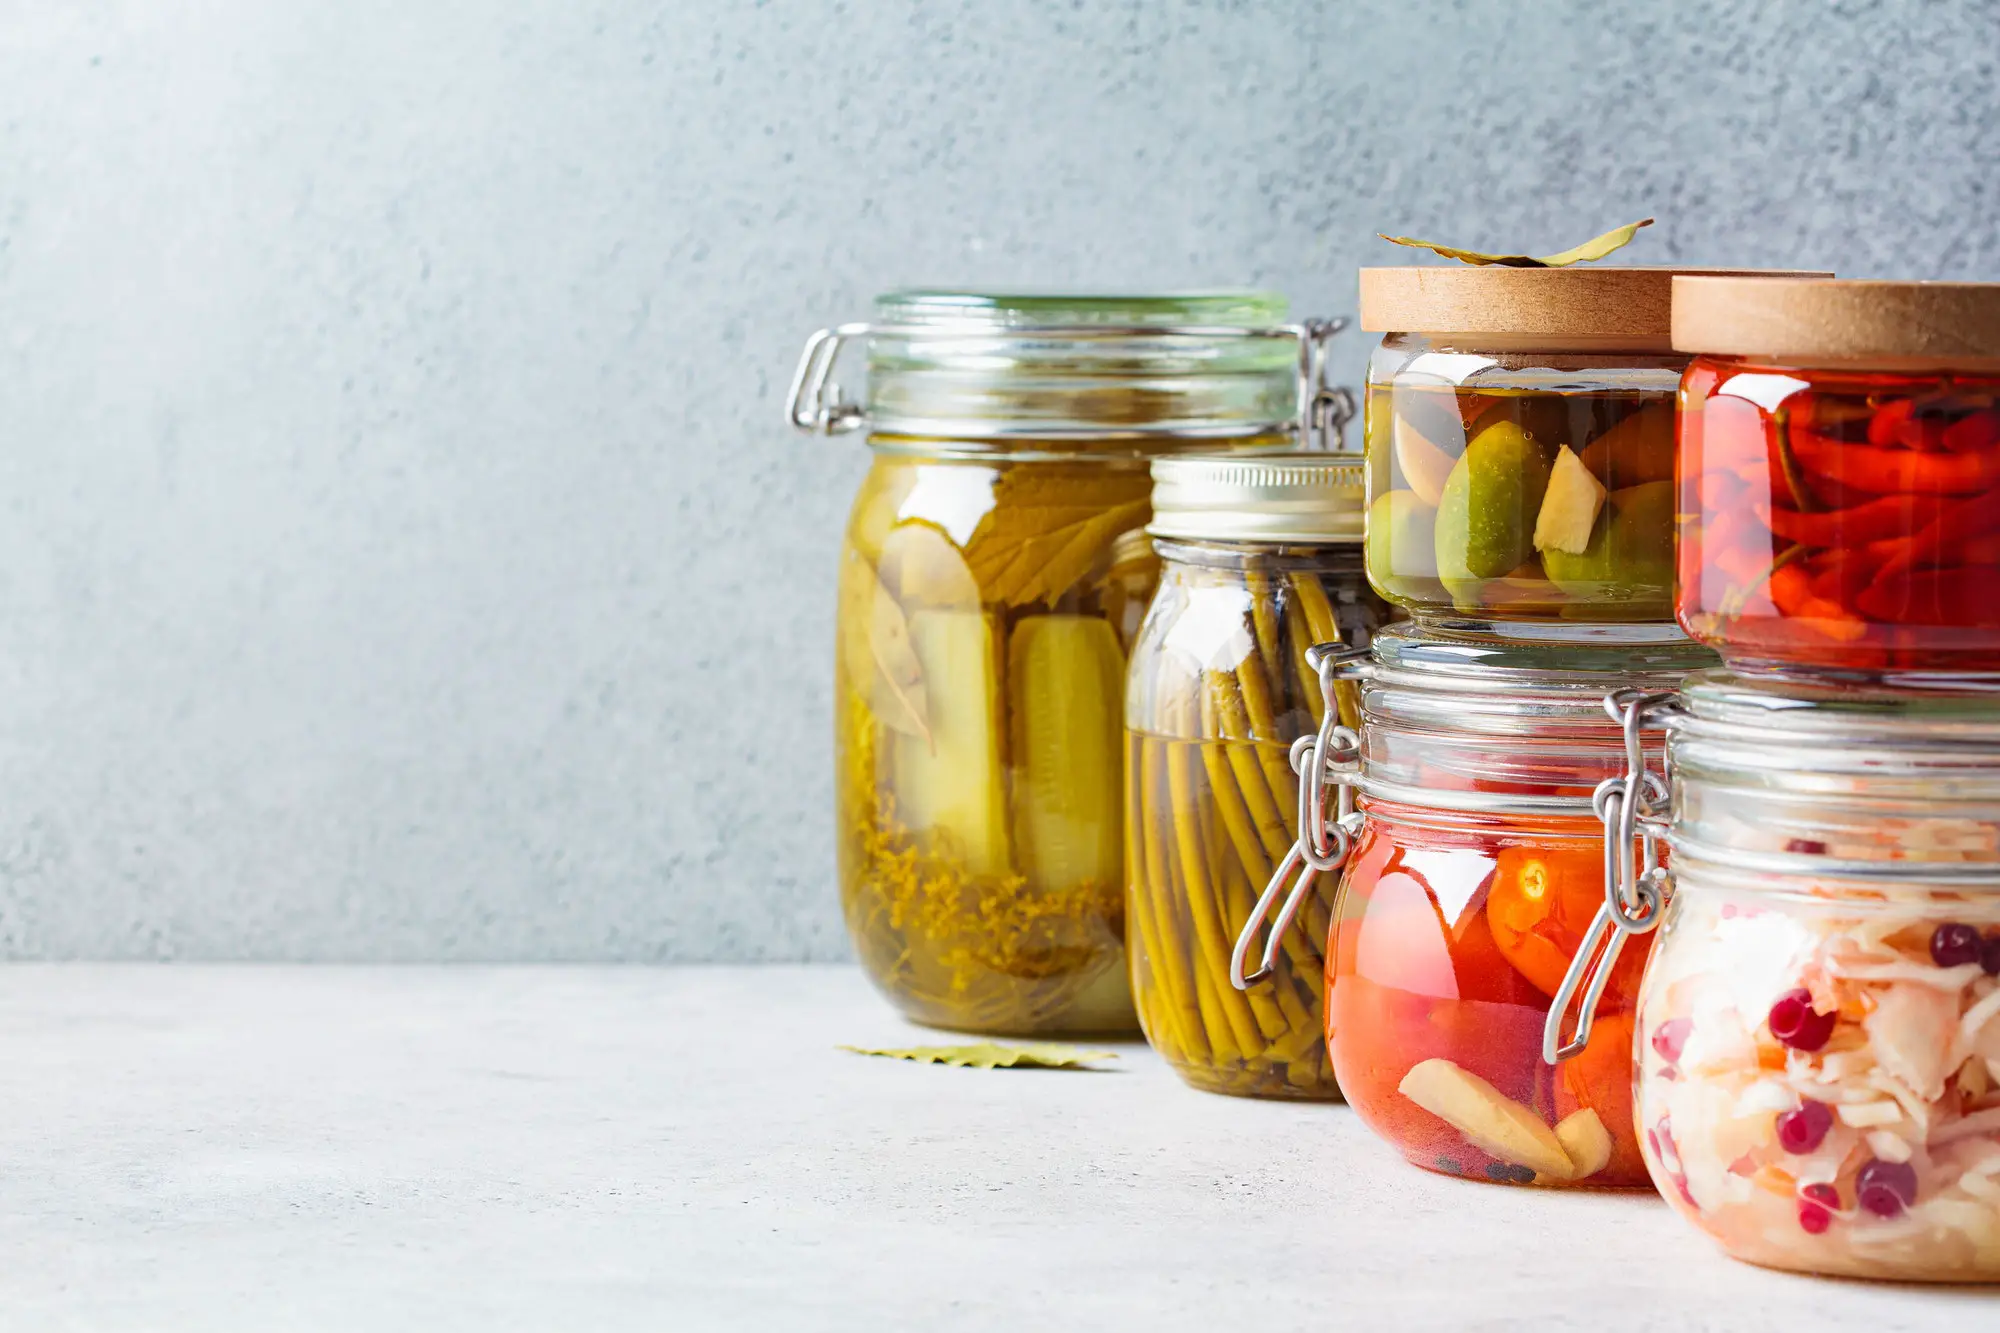 Homemade pickled and fermented vegetables in glass jars, copy space. Home preservation concept.